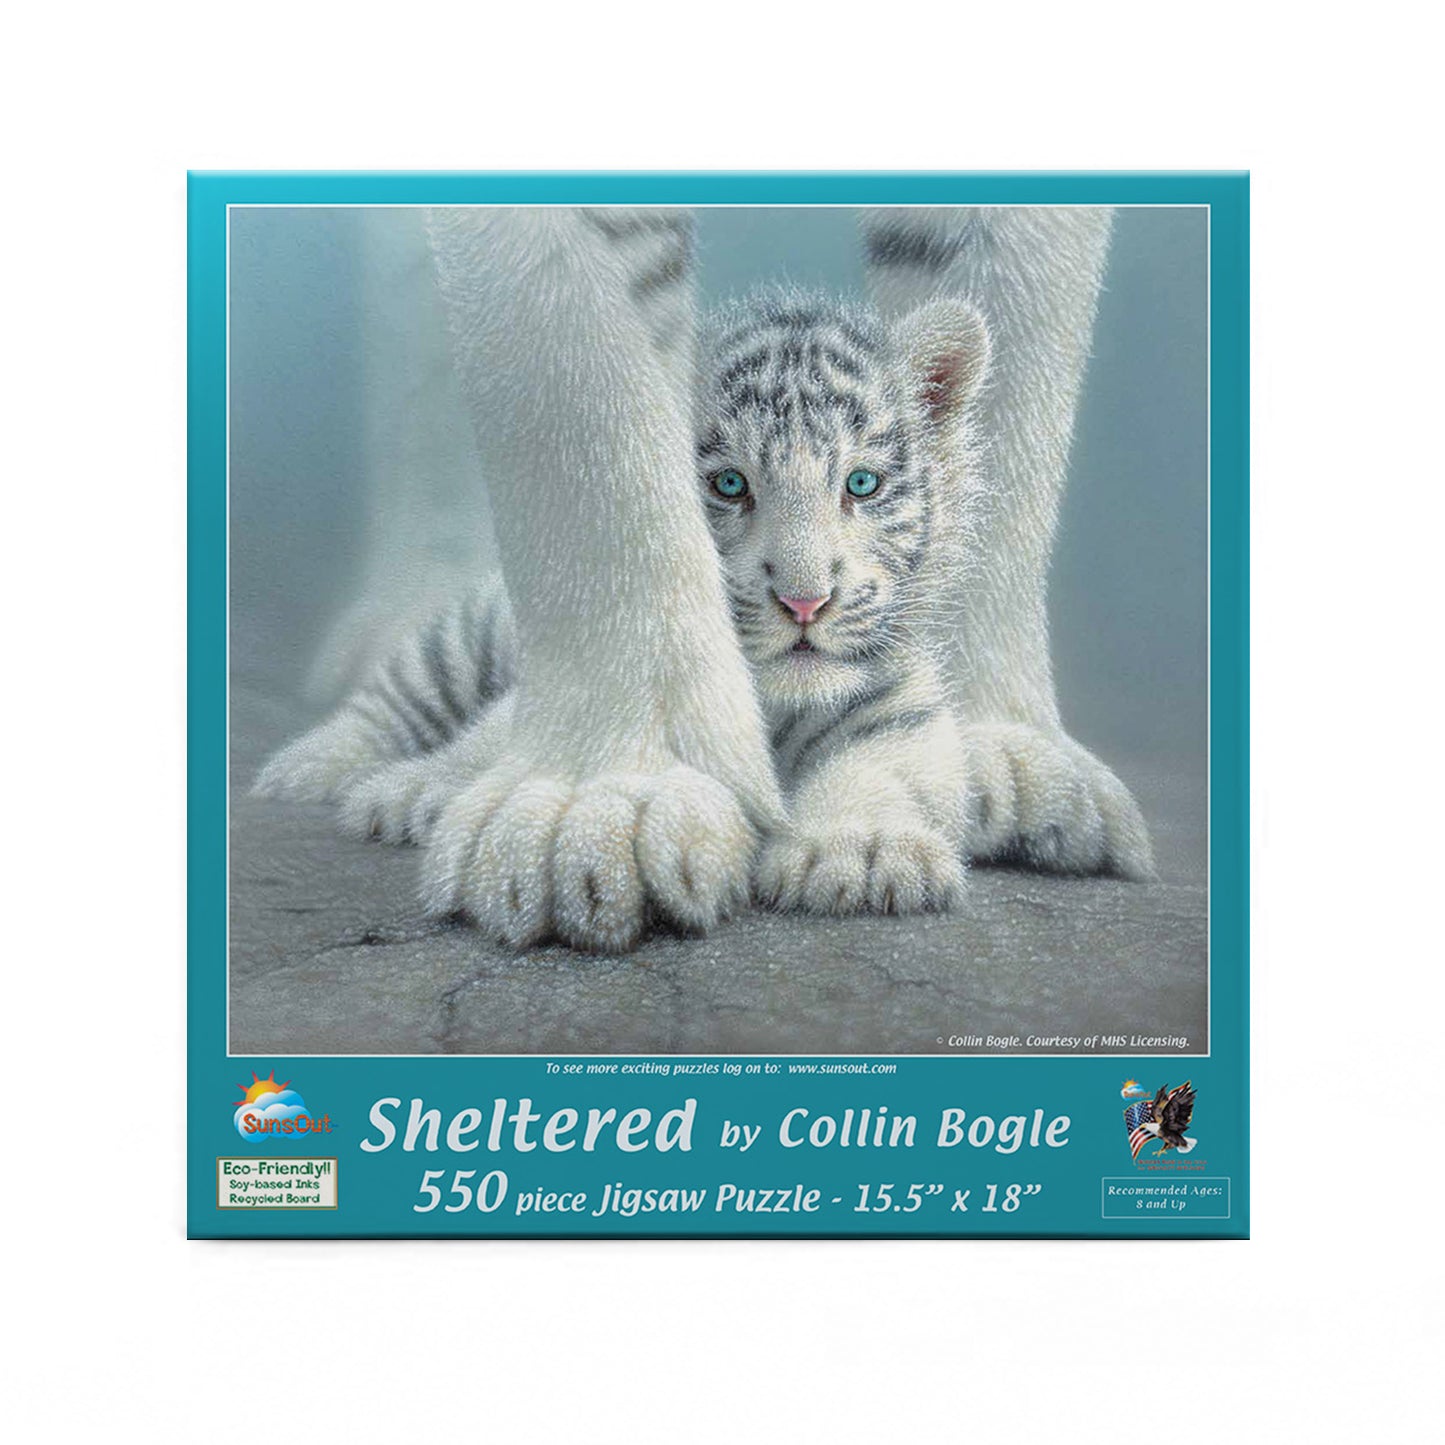 Sheltered(16) - 550 Piece Jigsaw Puzzle